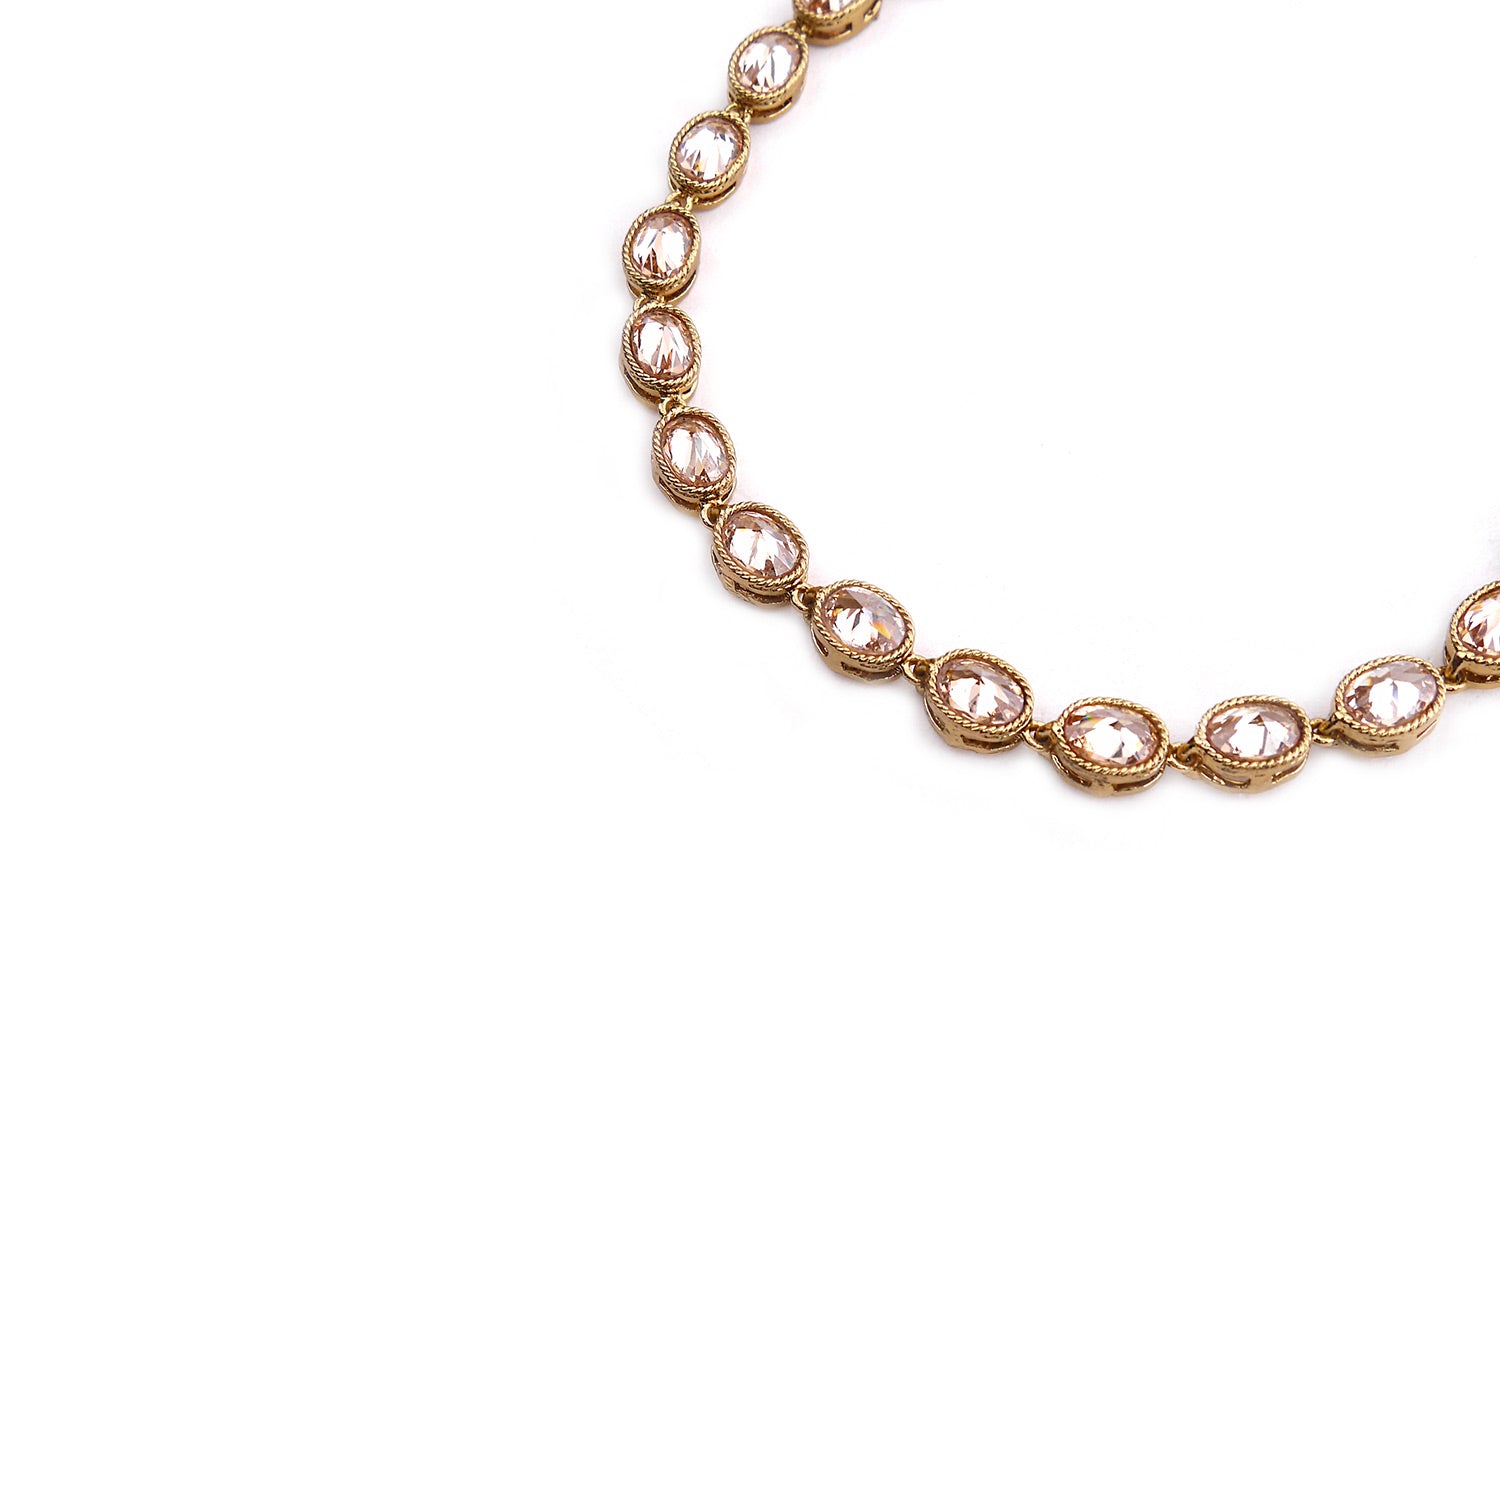 Oval Crystal Anklet in Gold